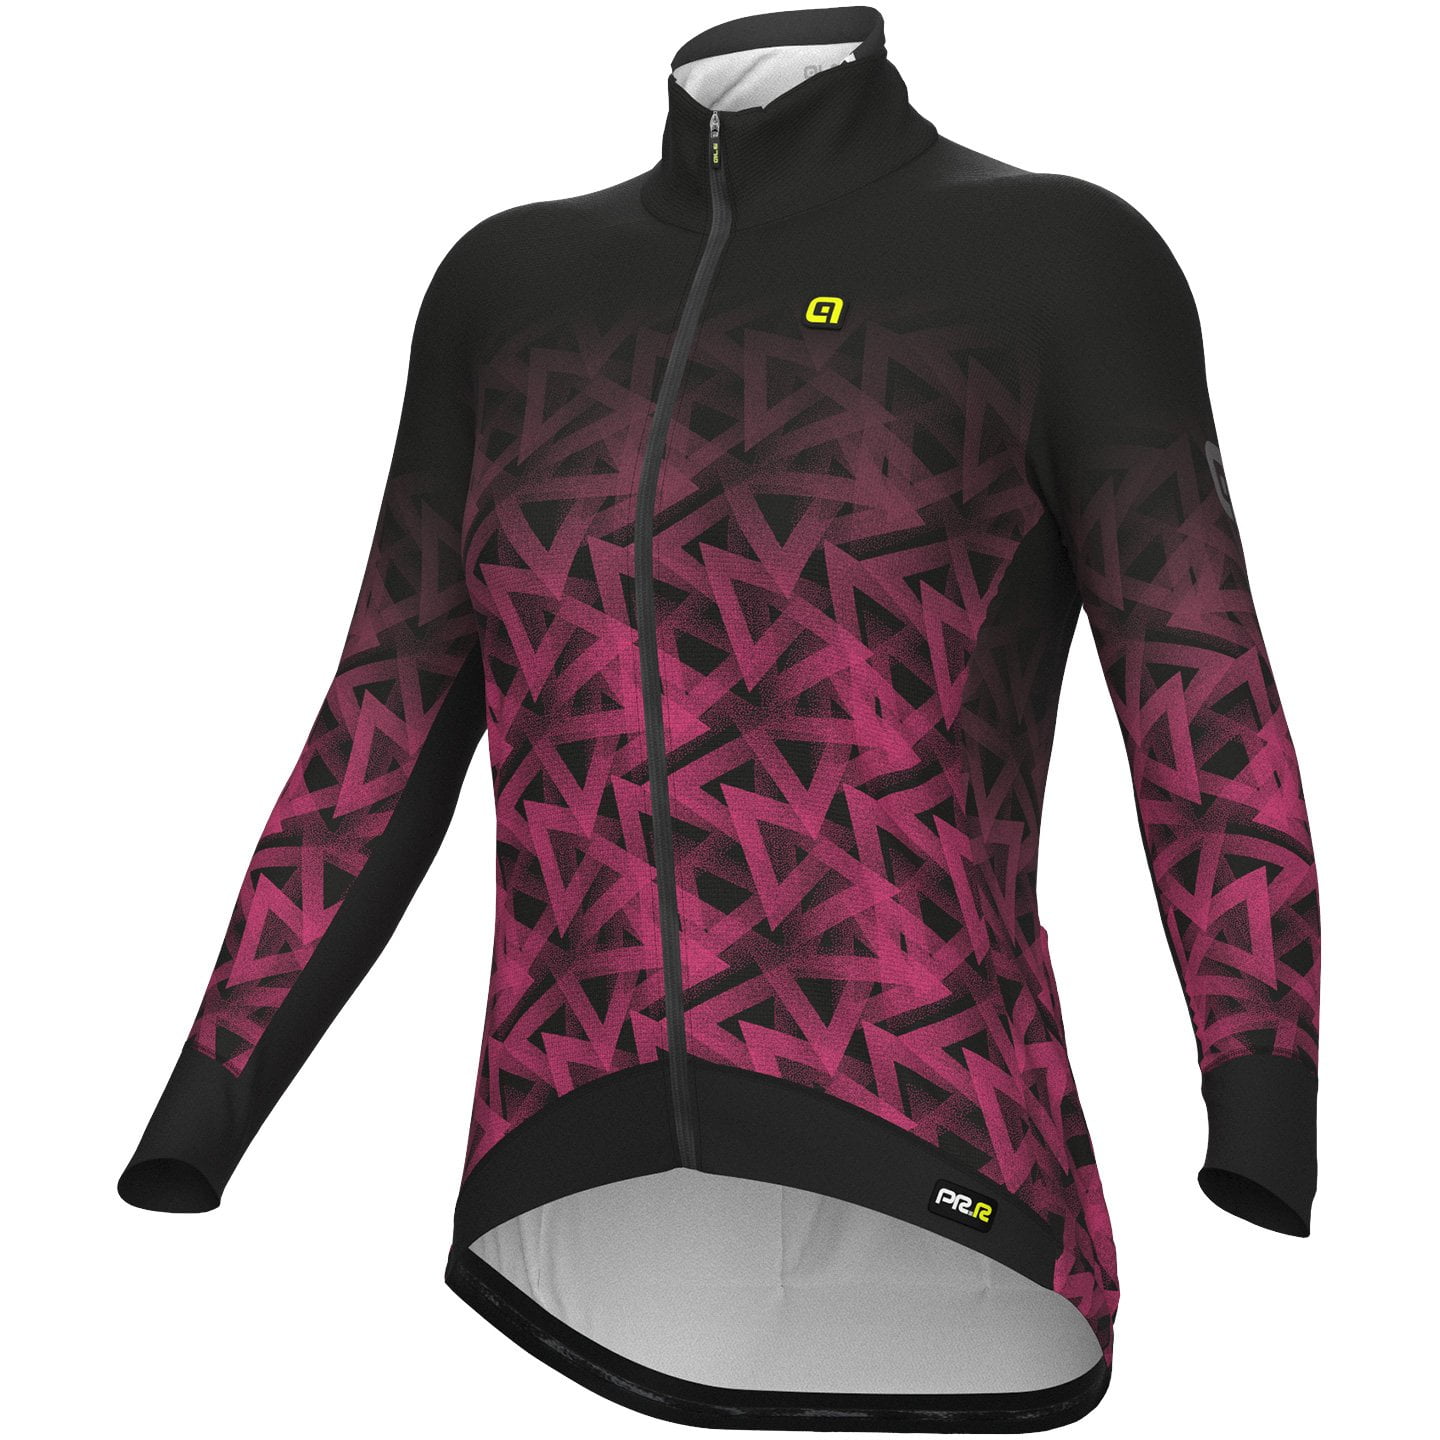 ALE Pyramid Women’s Winter Jacket Women’s Thermal Jacket, size S, Winter jacket, Cycle clothing